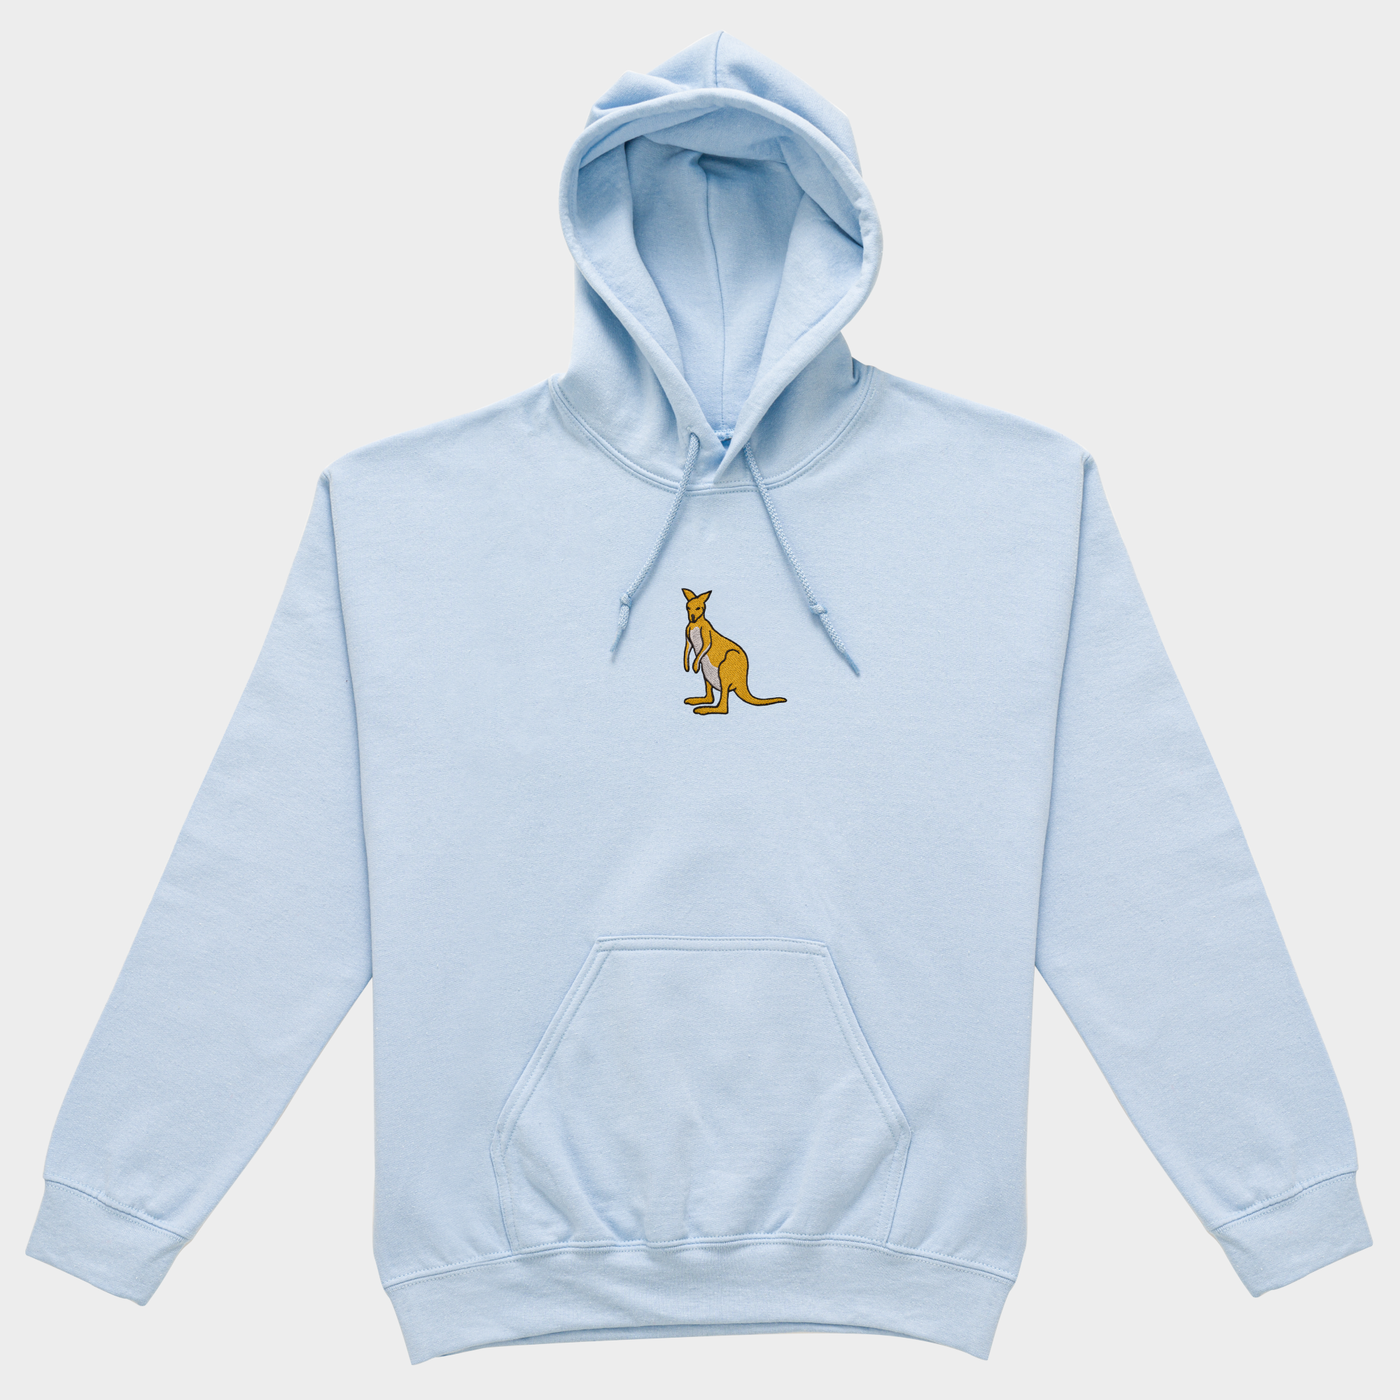 Bobby's Planet Women's Embroidered Kangaroo Hoodie from Australia Down Under Animals Collection in Light Blue Color#color_light-blue